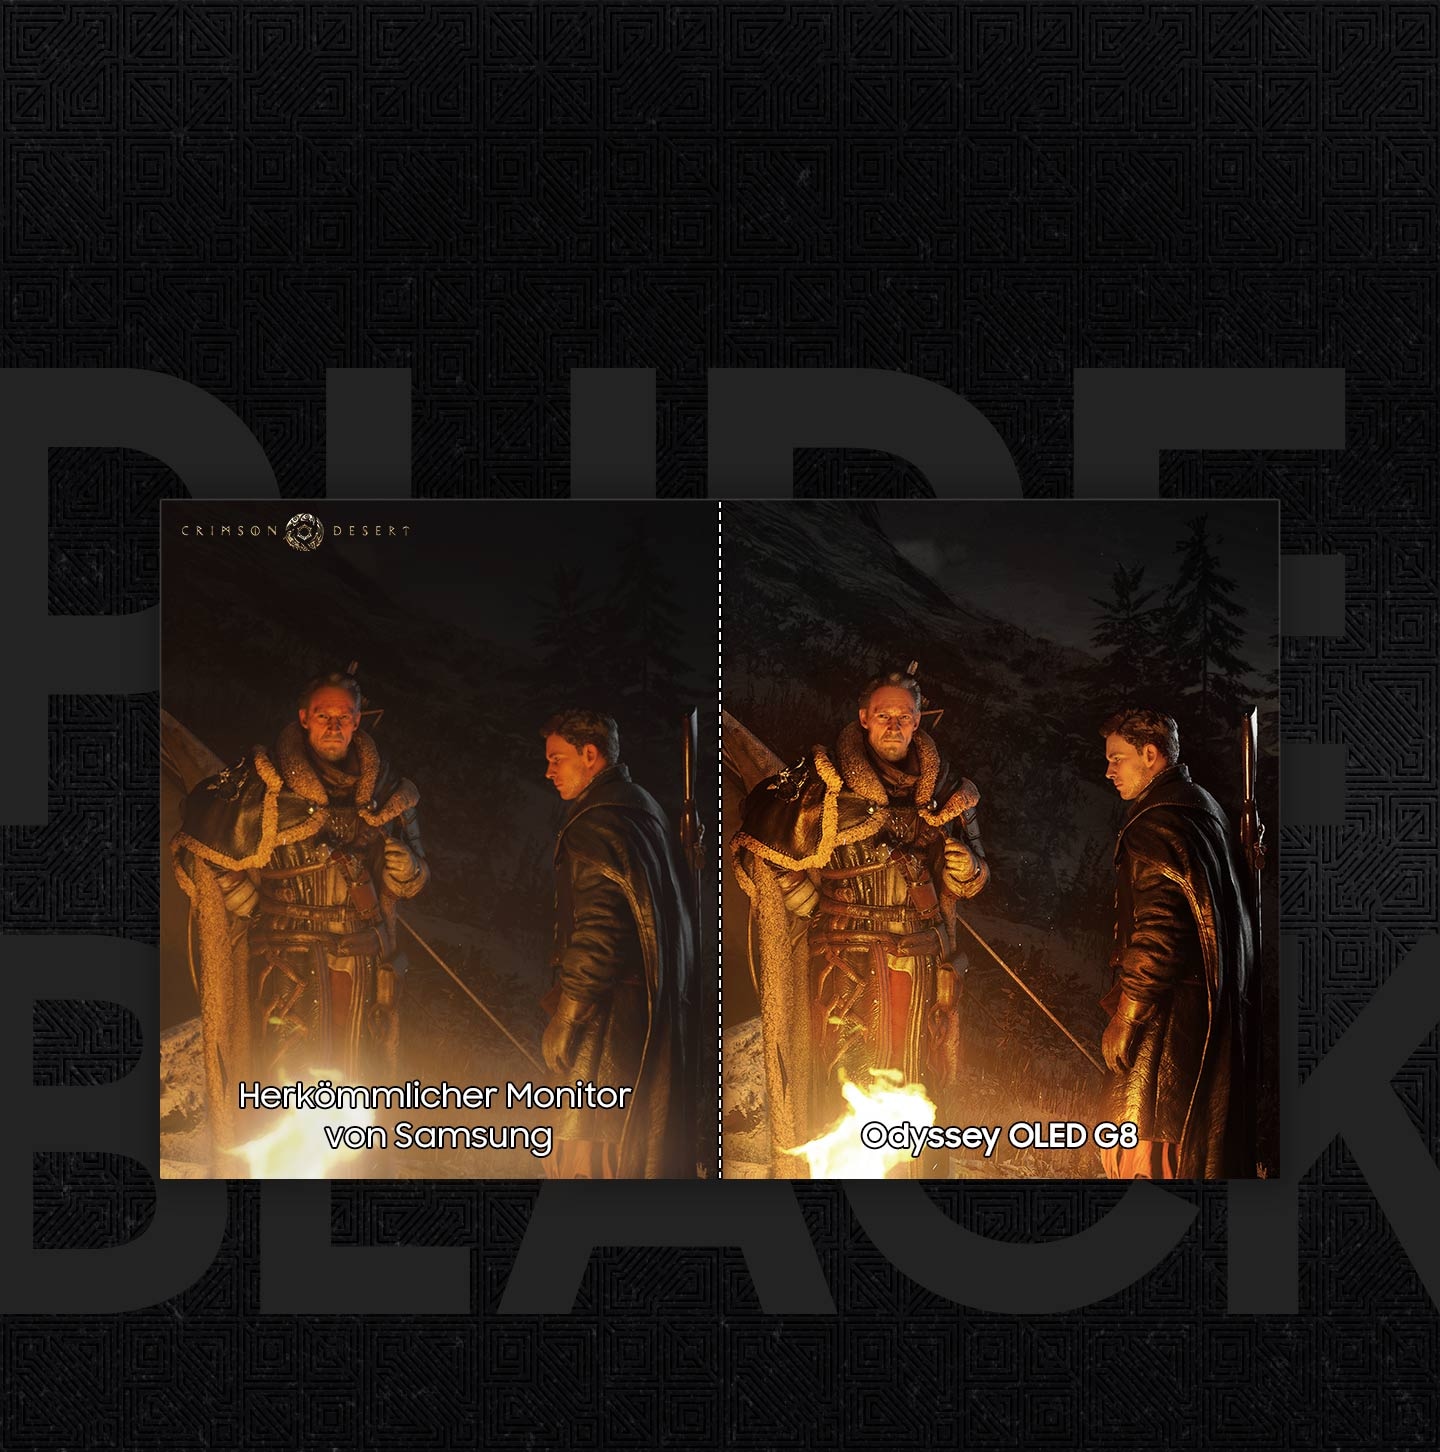 The same image of two men in cloaks around a campfire is shown twice in comparison. On the right, the image labeled "Odyssey G6," the blacks are much darker than the left image labeled "Samsung Conventional Monitor."